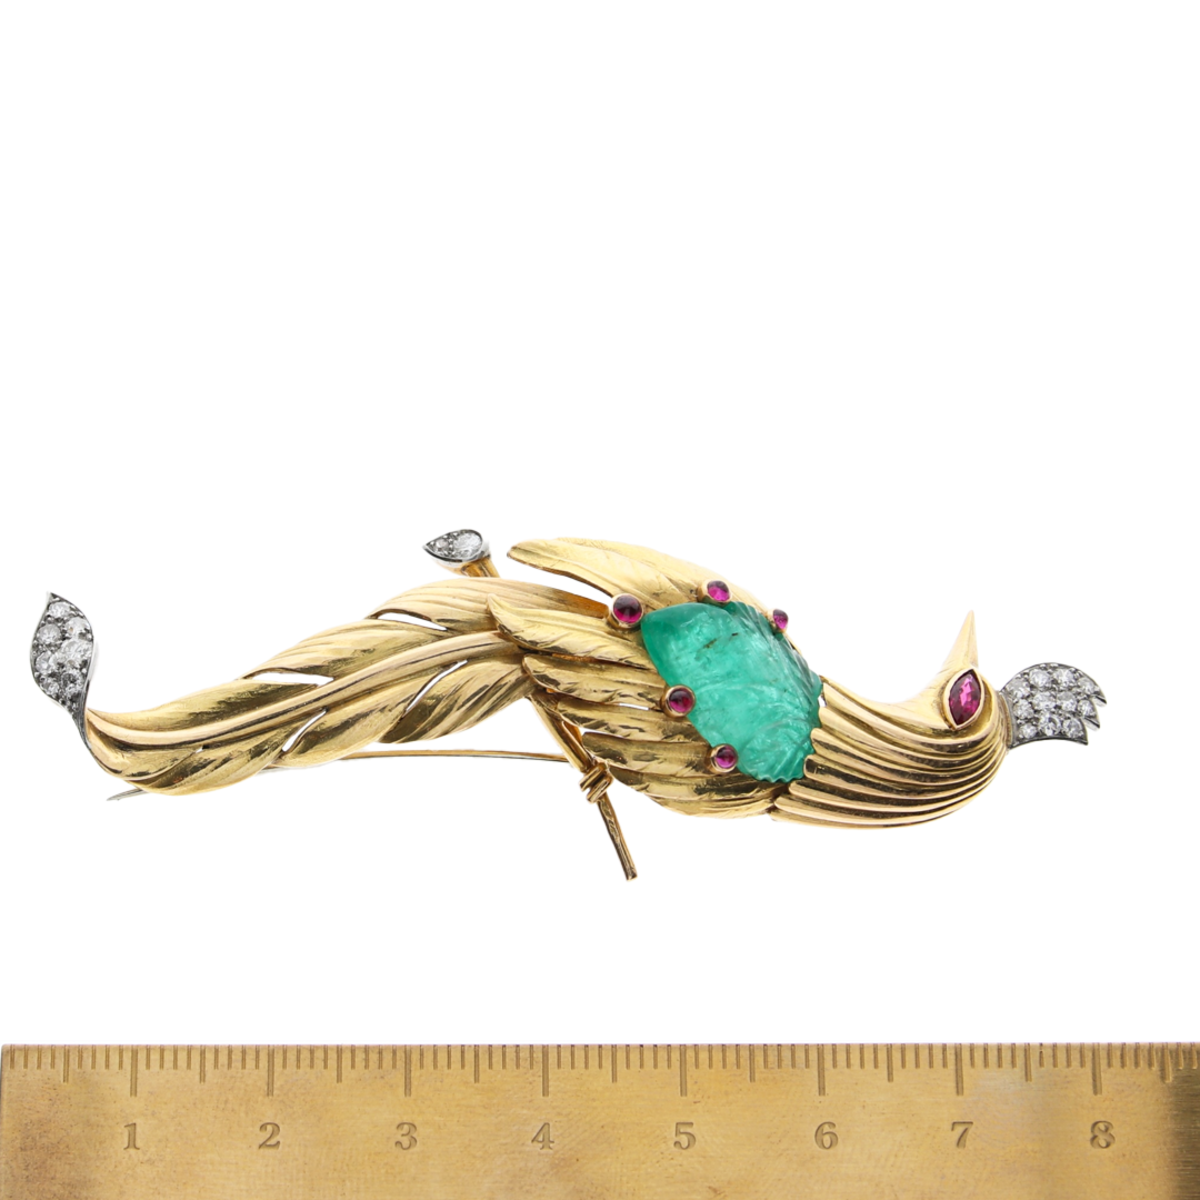 French 1930s 18KT Yellow Gold Emerald, Diamond & Ruby Bird Brooch measurements